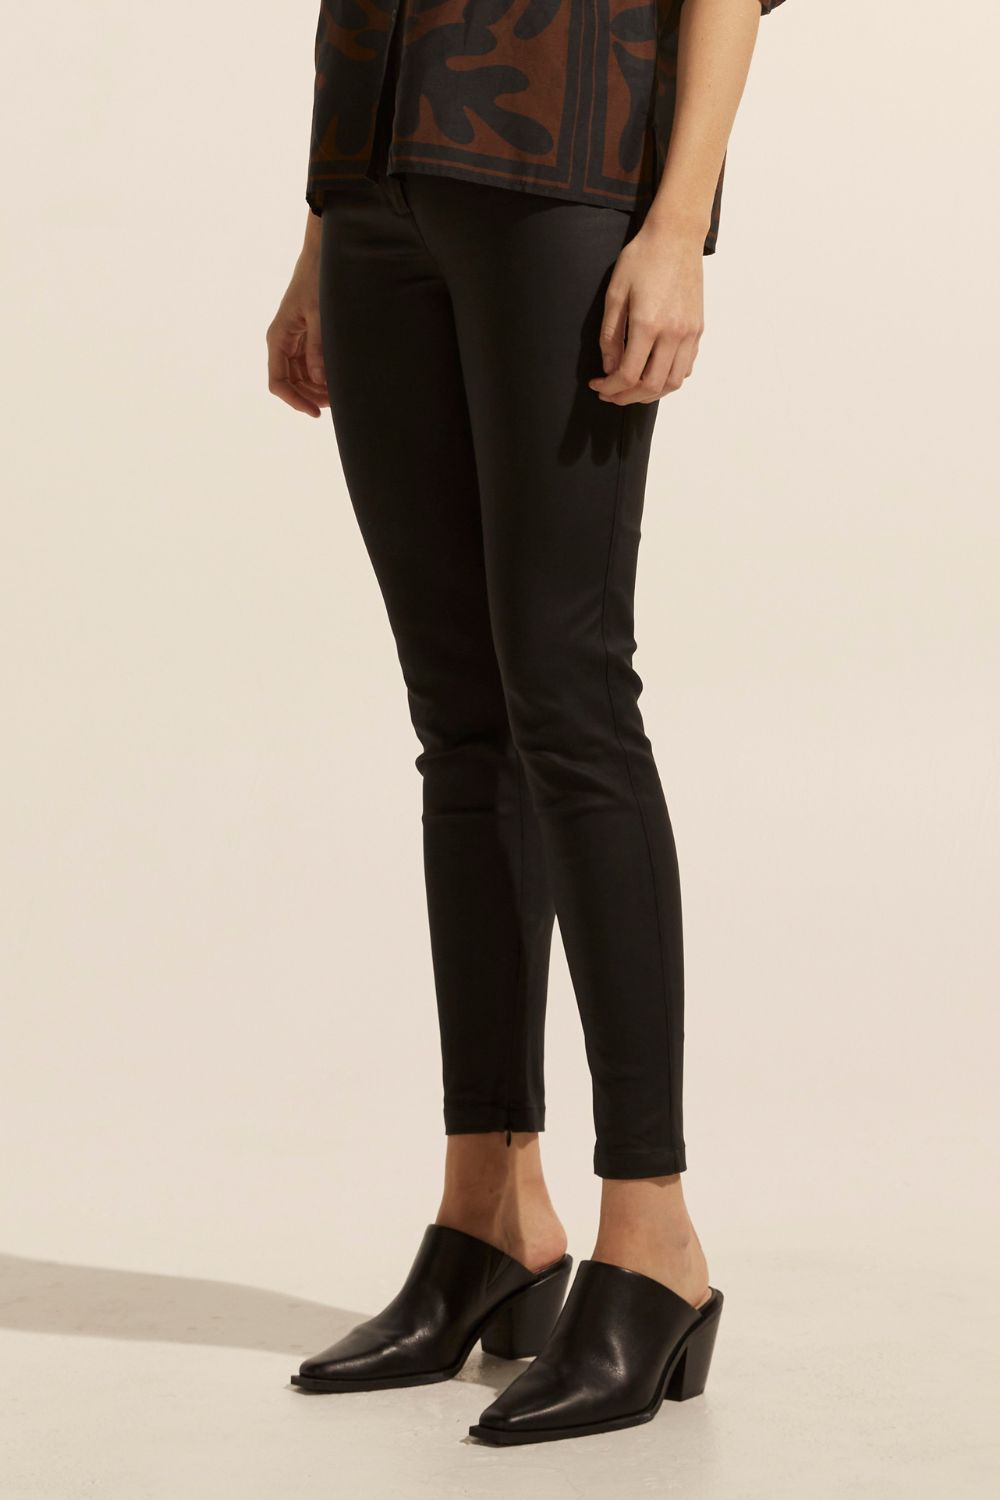 Contest pant - Black coated